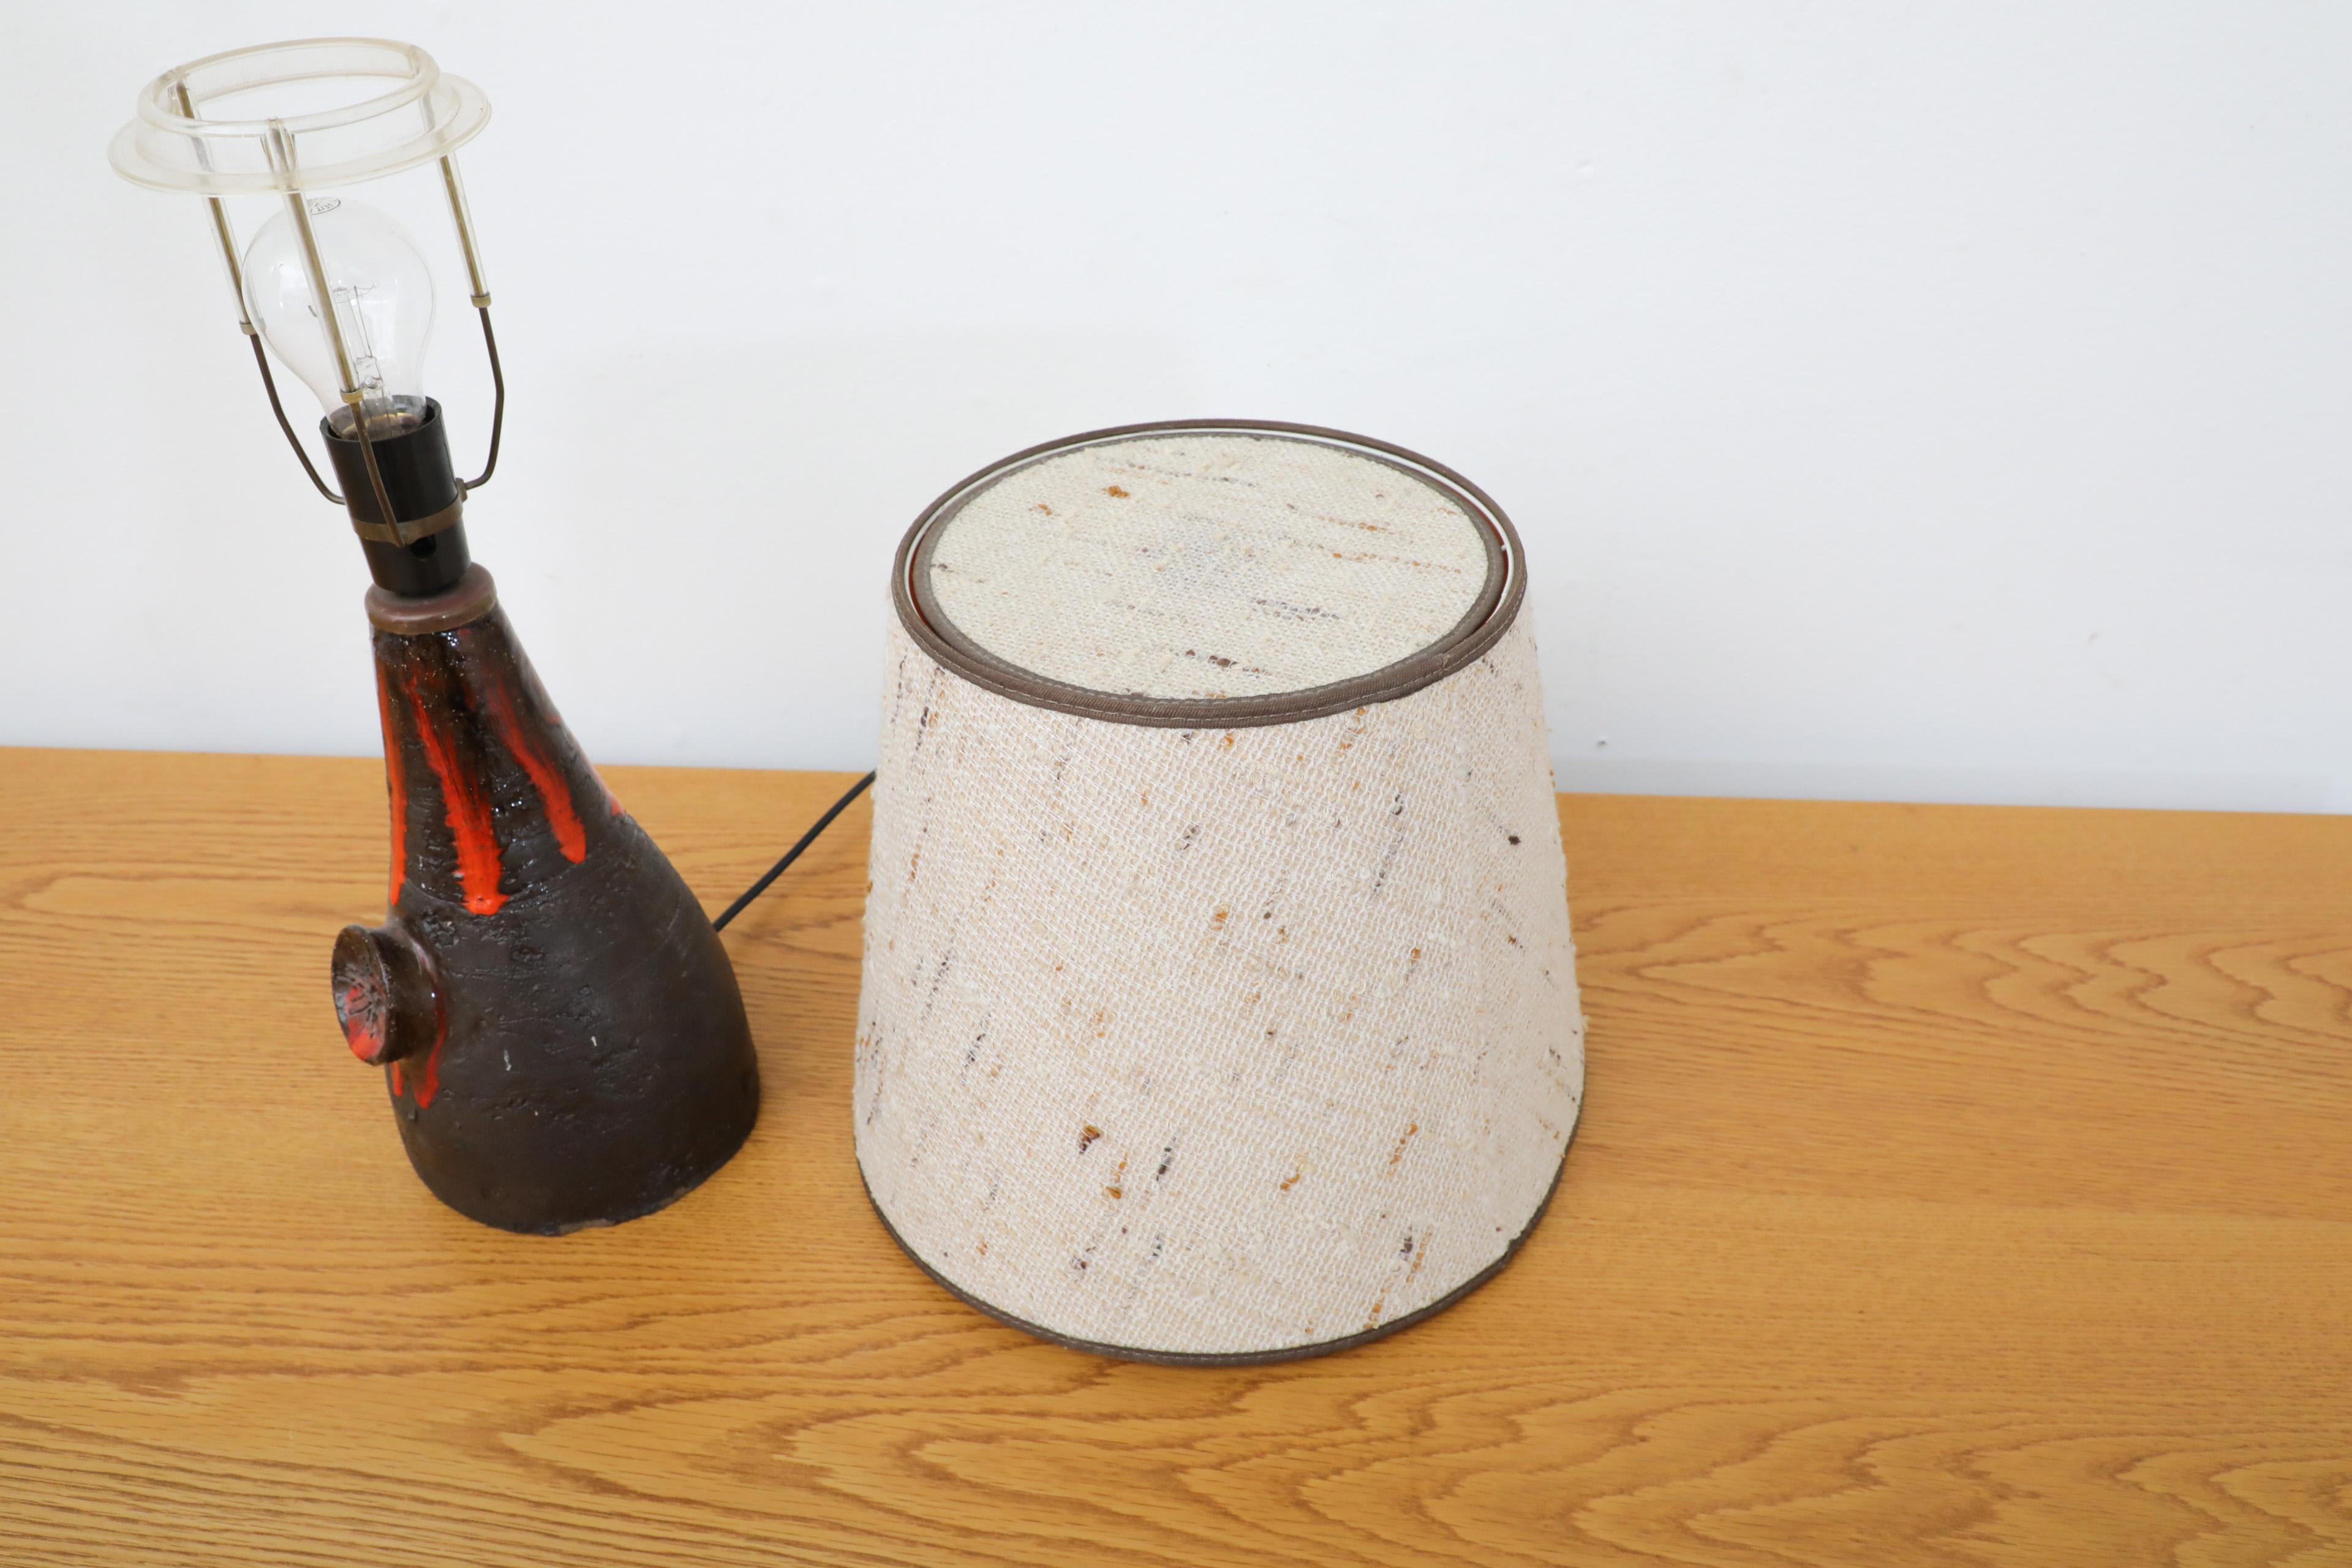 Dutch Mid-Century Black Ceramic Volcanic Table Lamp w/ Red Dripping Effect Glaze For Sale 6